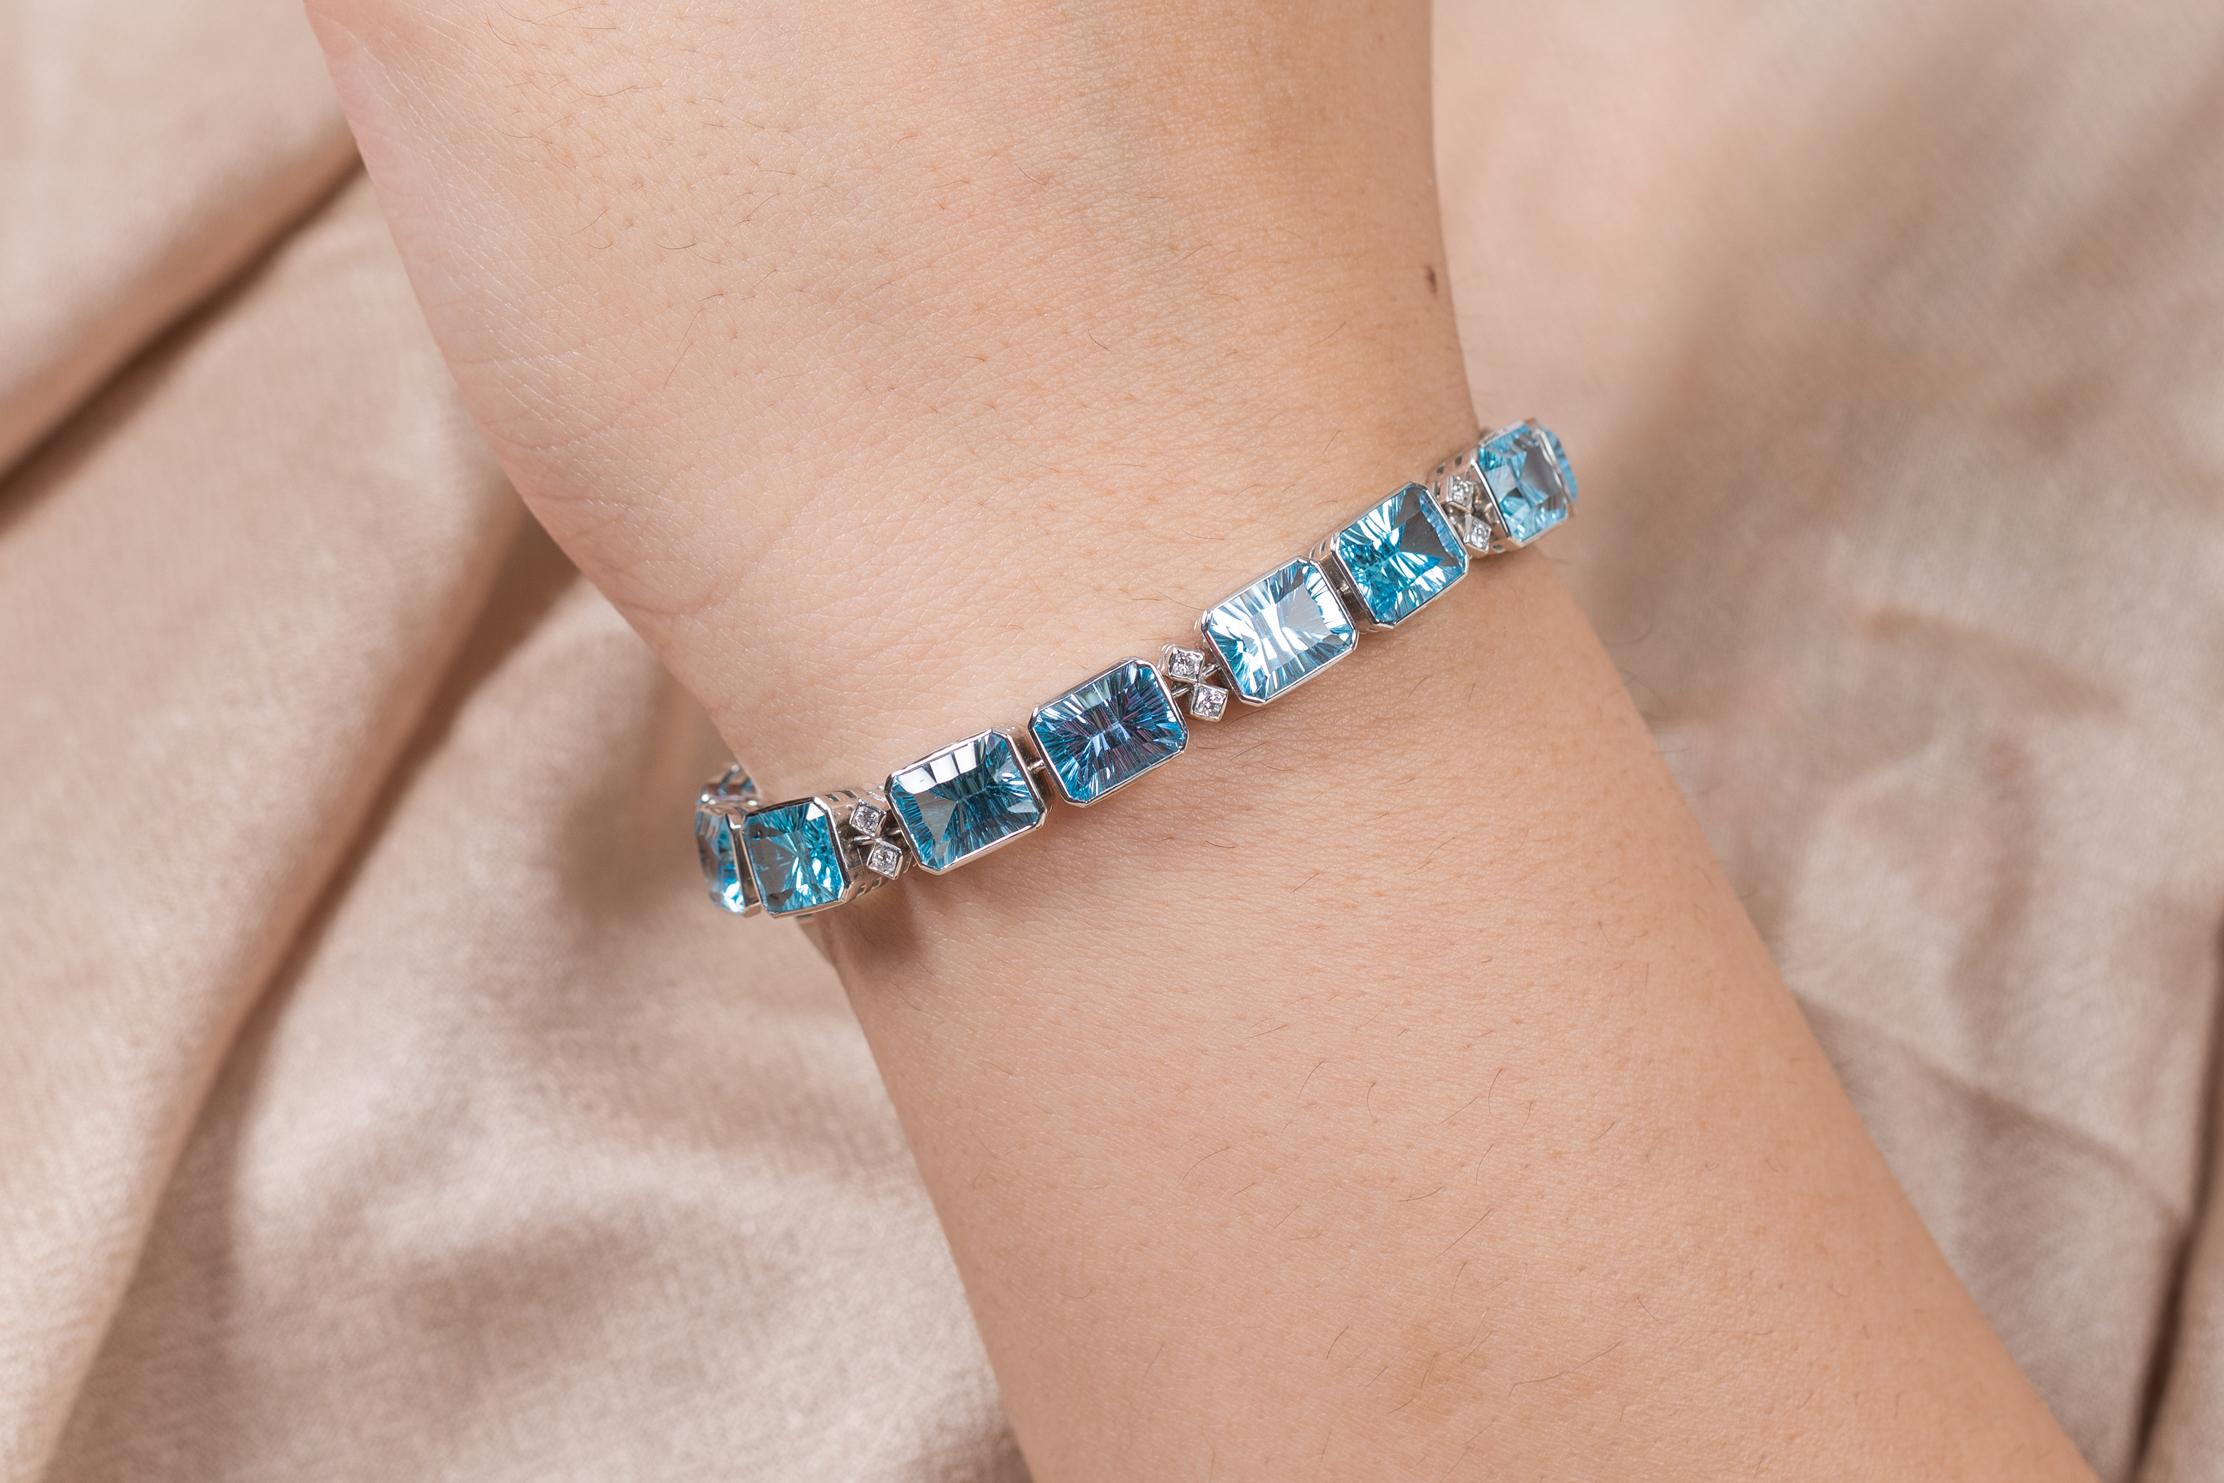 This Fine Cut 40 ct Blue Topaz and Diamond Tennis Bracelet in 18K gold showcases 16 endlessly sparkling natural blue topaz, weighing 40 carats. It measures 7.5 inches long in length. 
Blue topaz helps to improve communication and self expression.